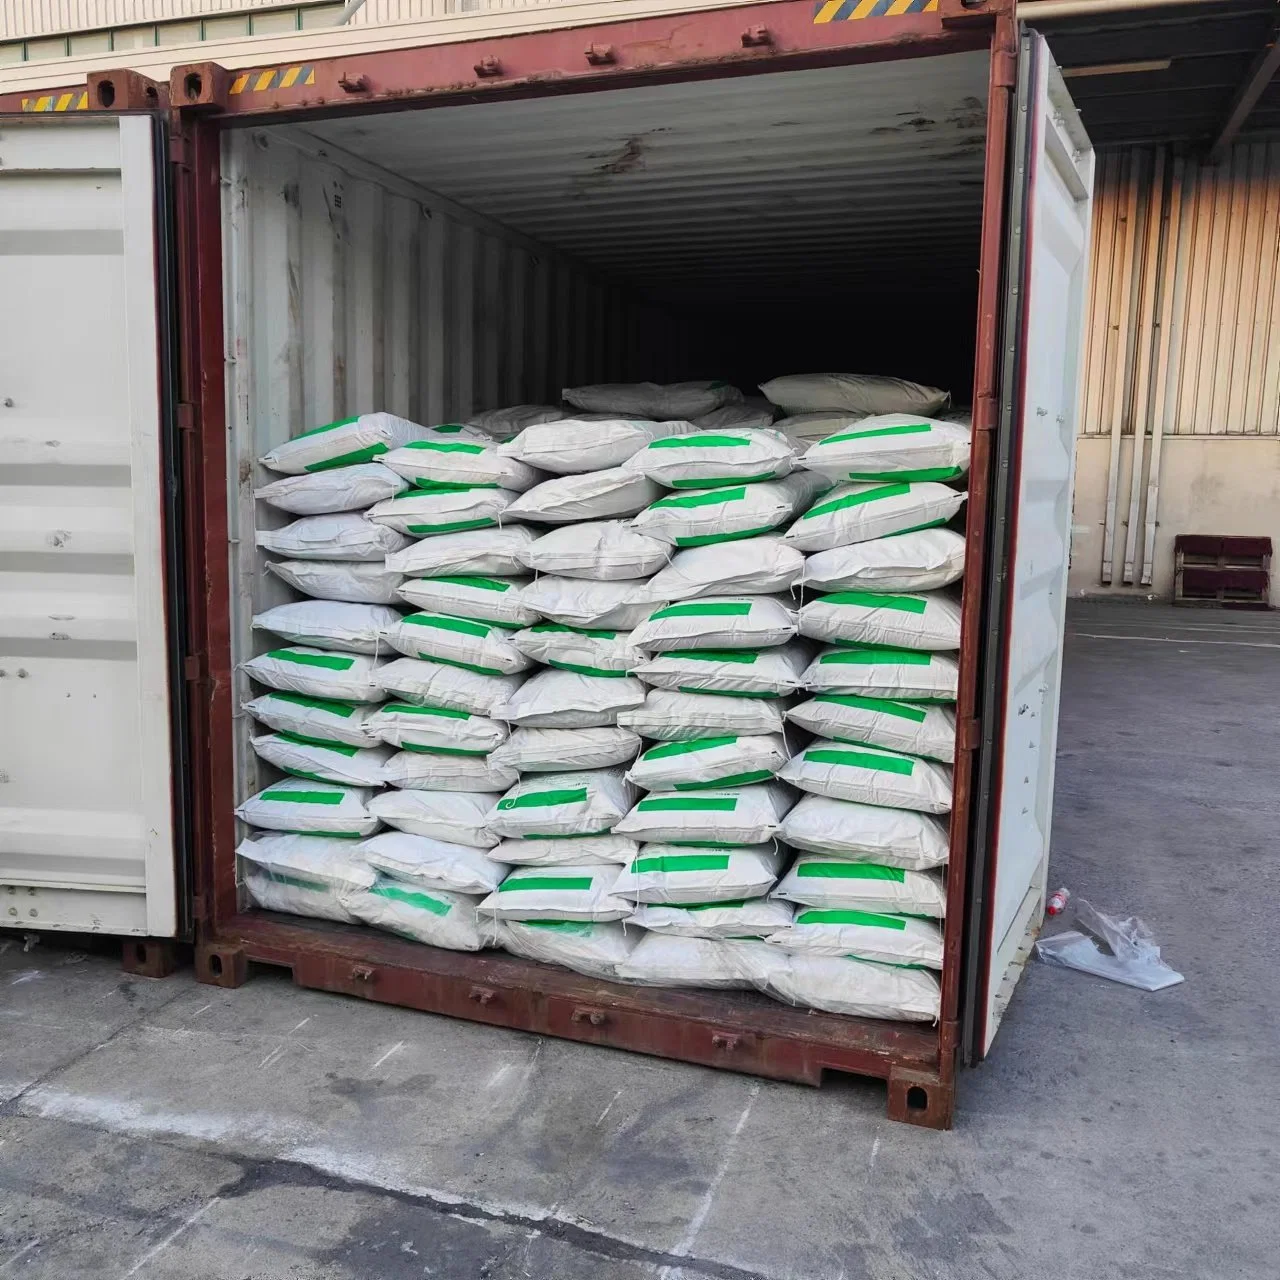 High quality/High cost performance  L-Lysine Sulphate with Cheap Price CAS No. 60343-69-3